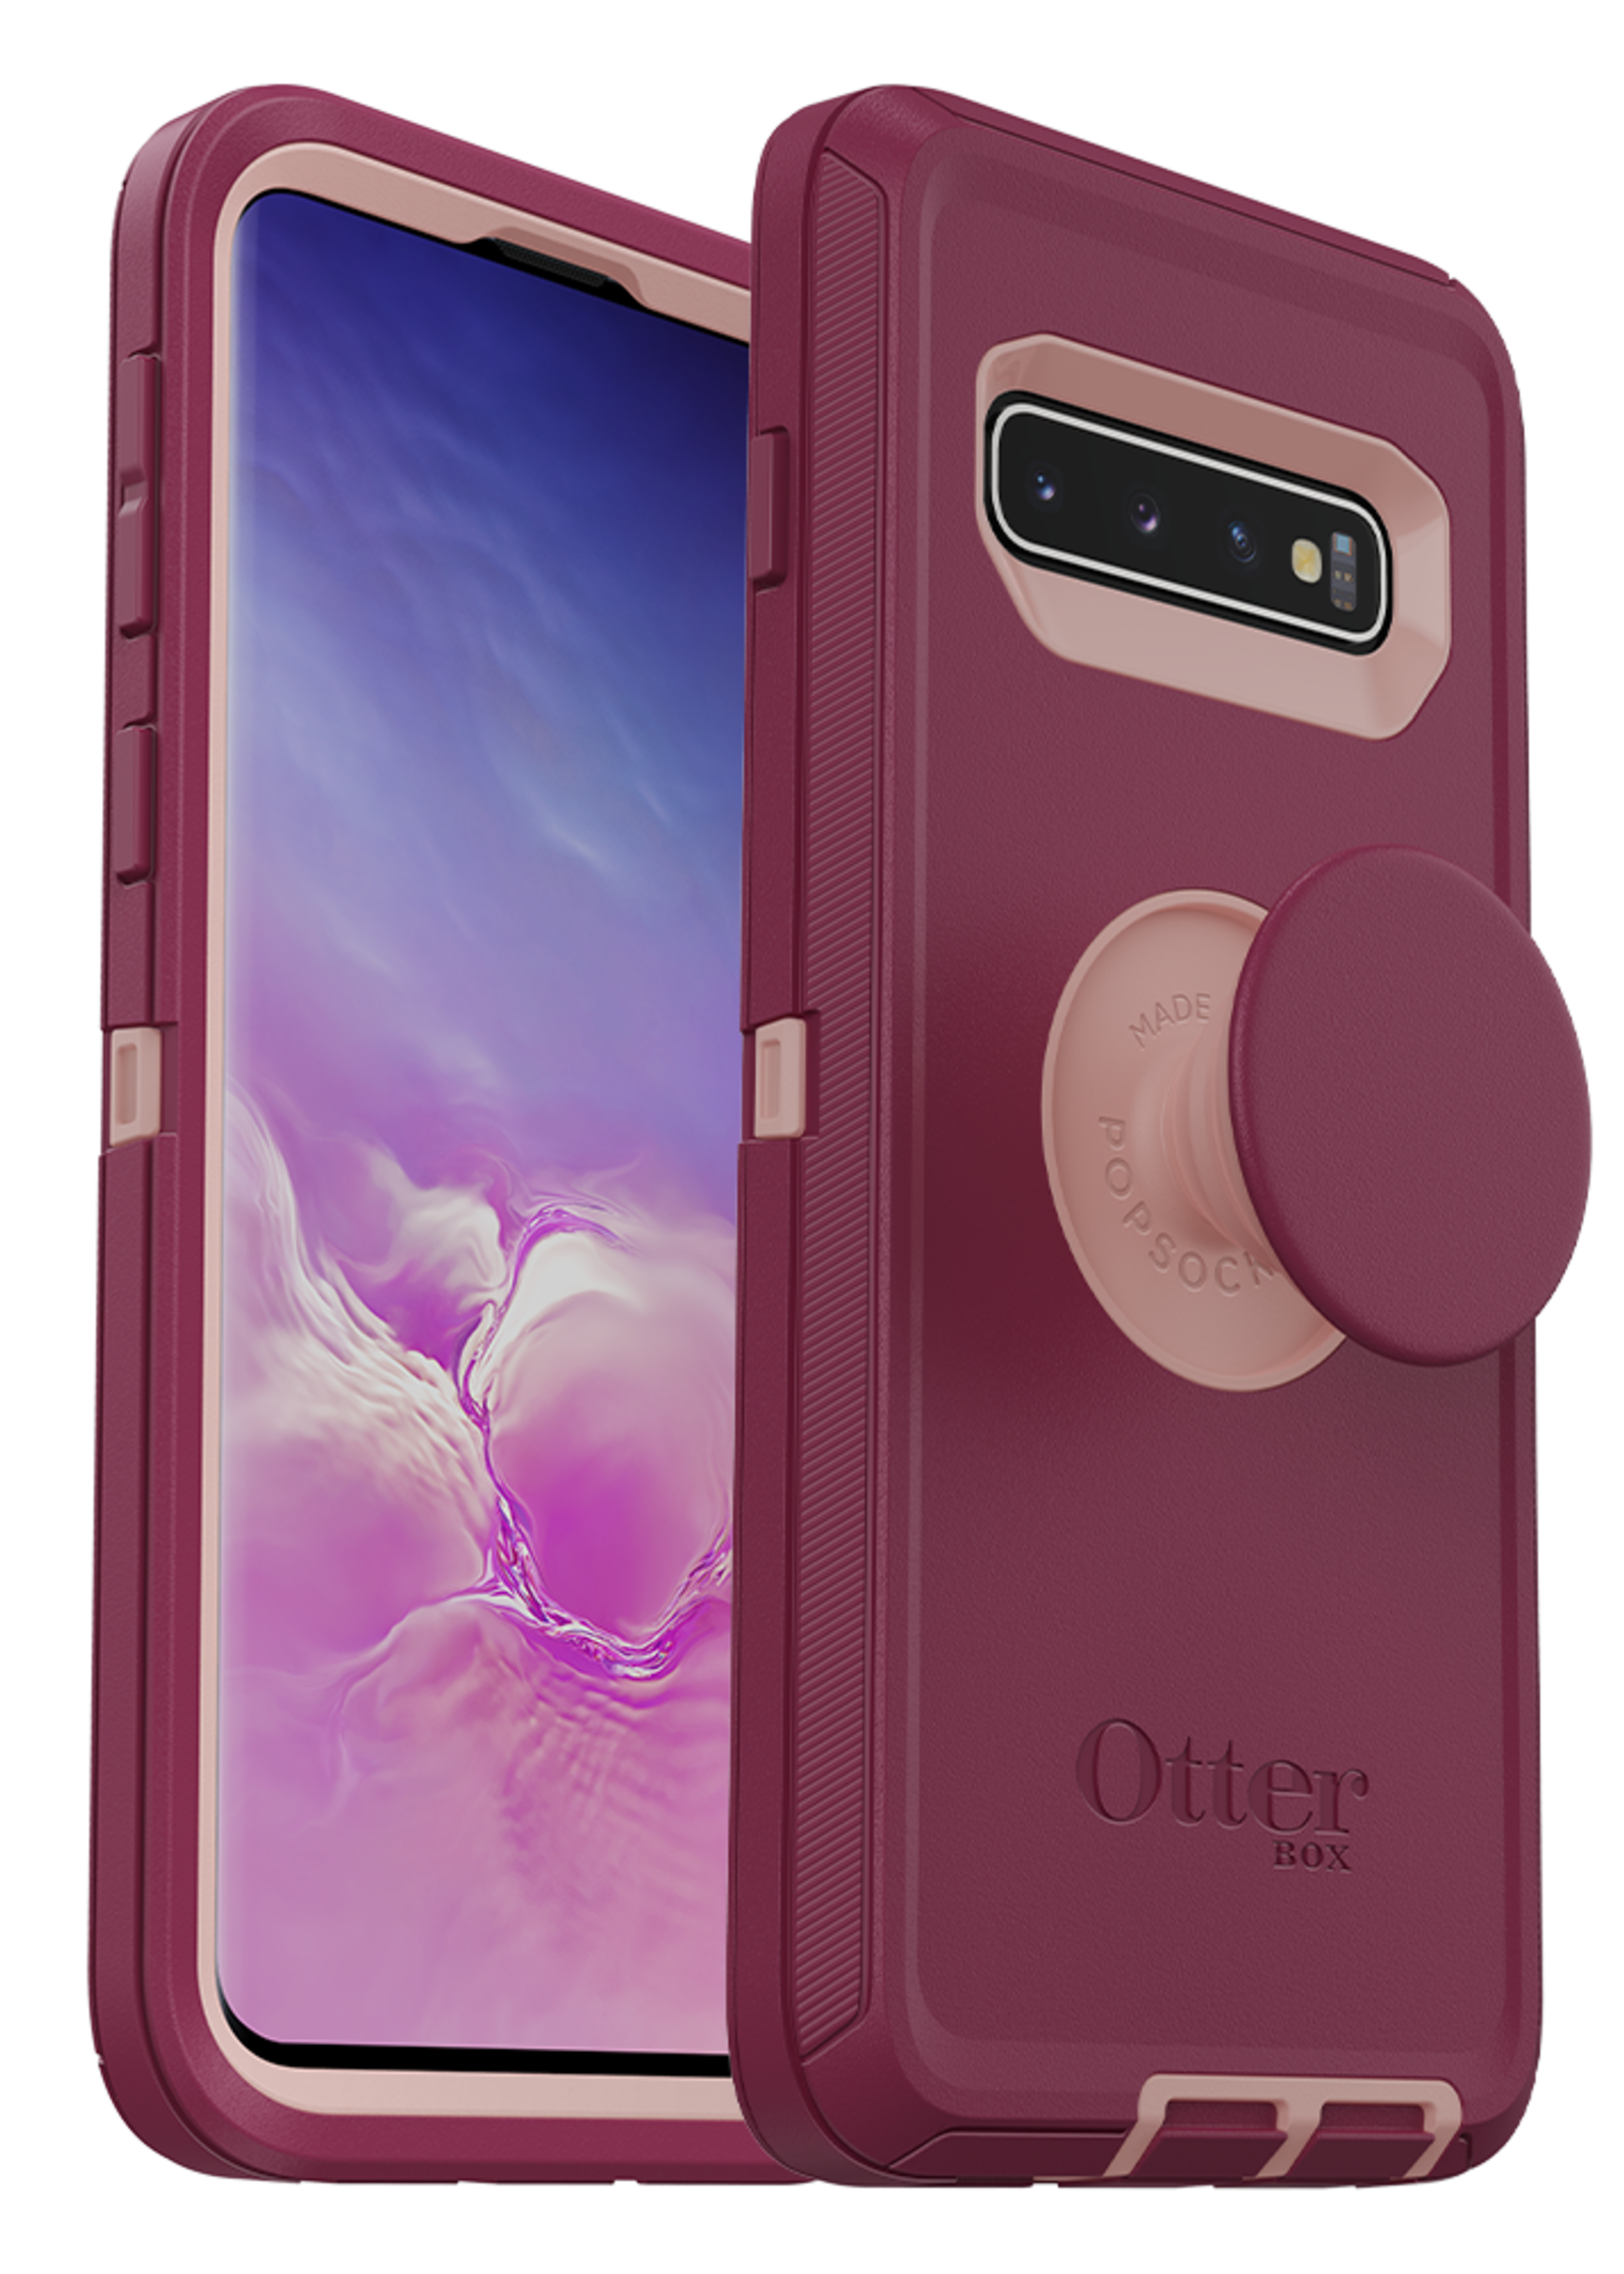 Otterbox OtterBox - Otter + Pop Defender Case with PopGrip for Samsung Galaxy S10 - Fall Blossom